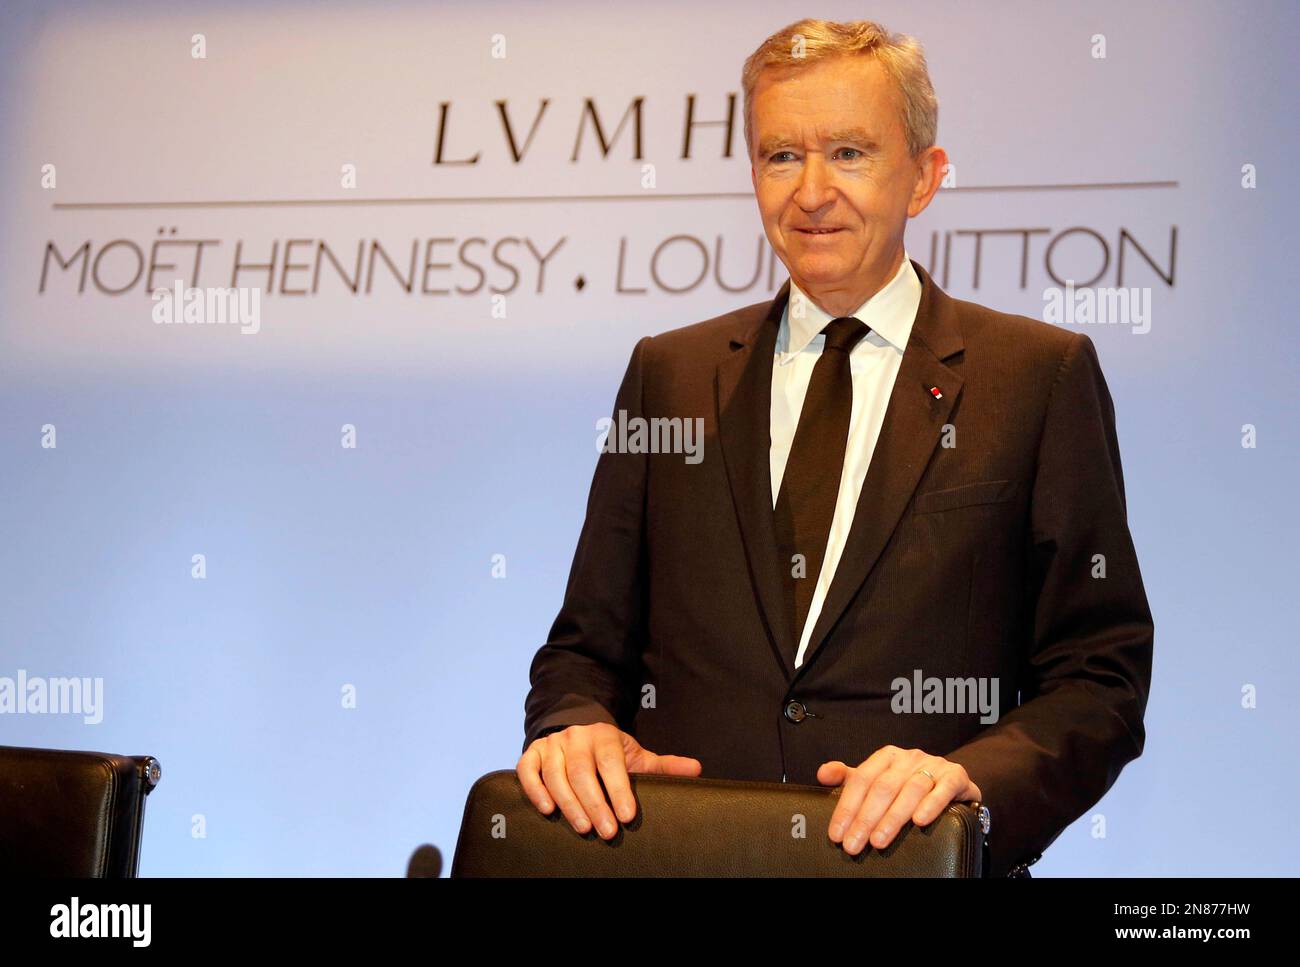 The chairman and CEO of the French conglomerate LVMH Moet Hennessy Louis  Vuitton SA Bernard Arnault (M) and his son Antoine Arnault (L) walks out  the Stock Photo - Alamy